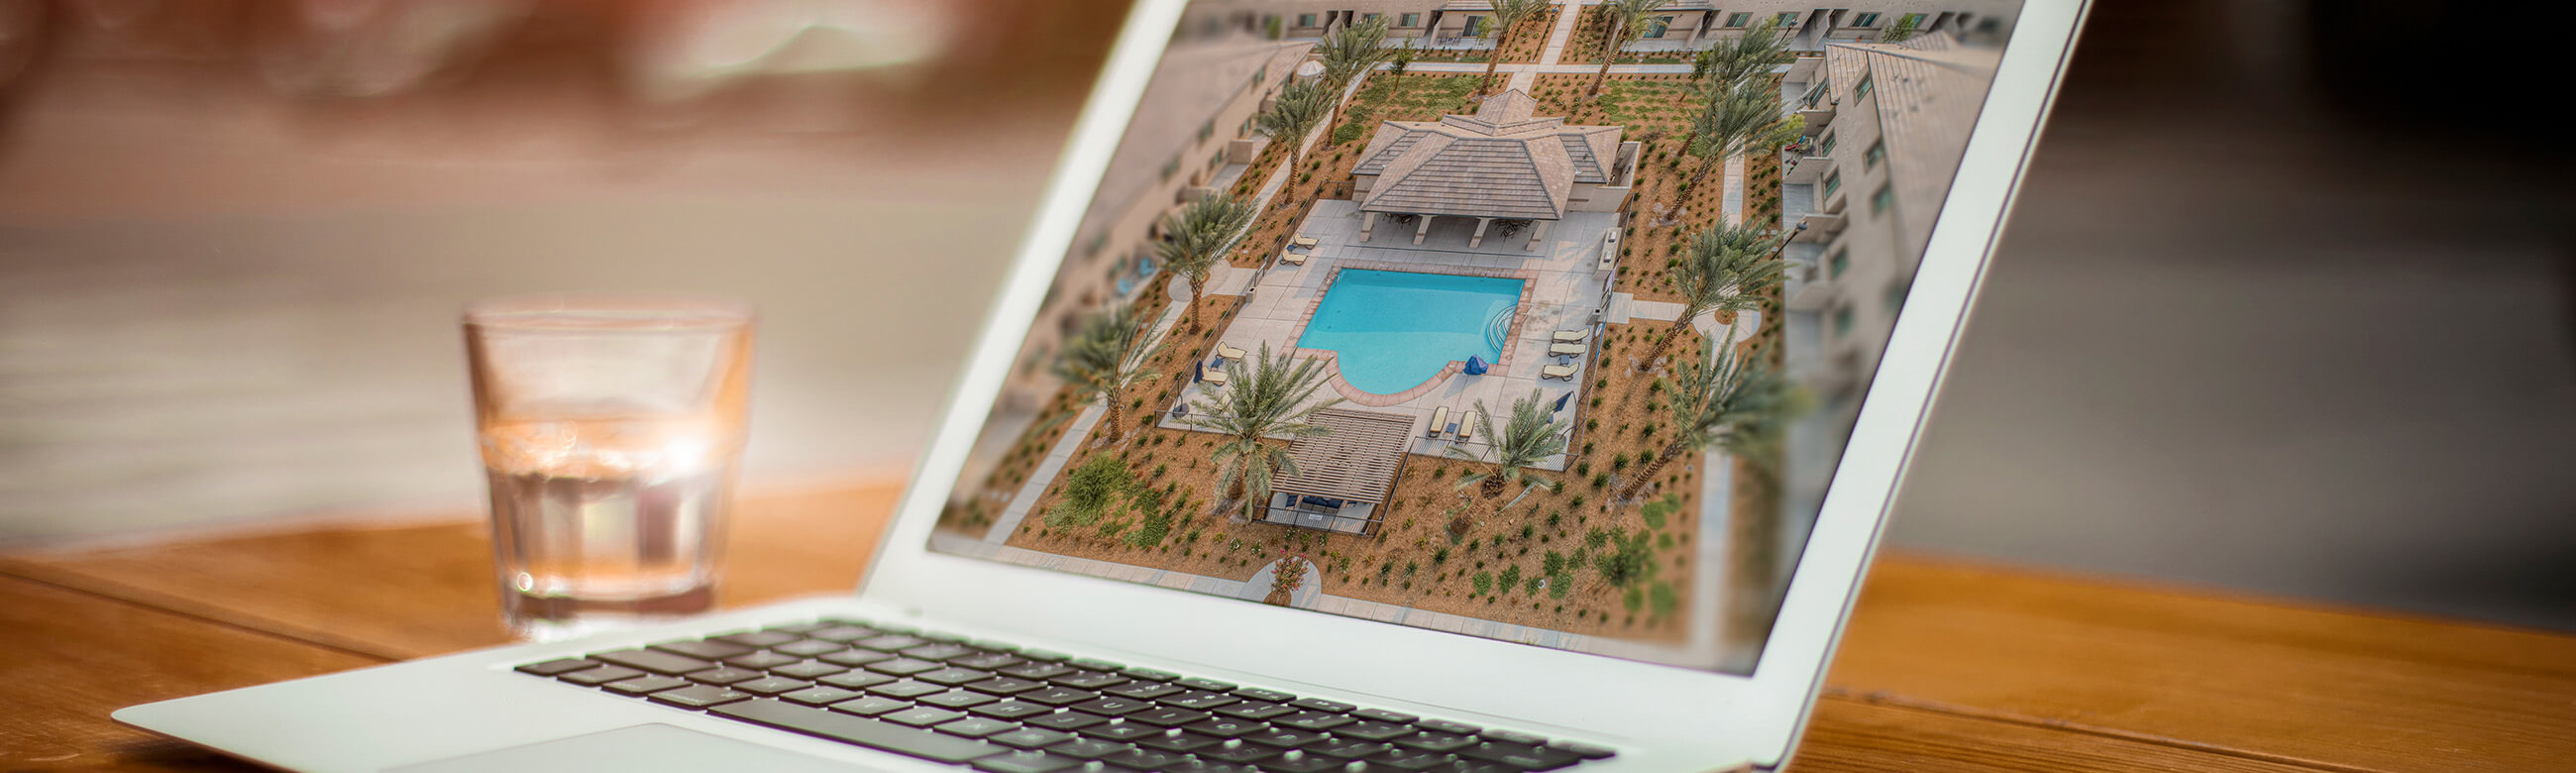 laptop computer with an arial view of a clubhouse and pool on the screen